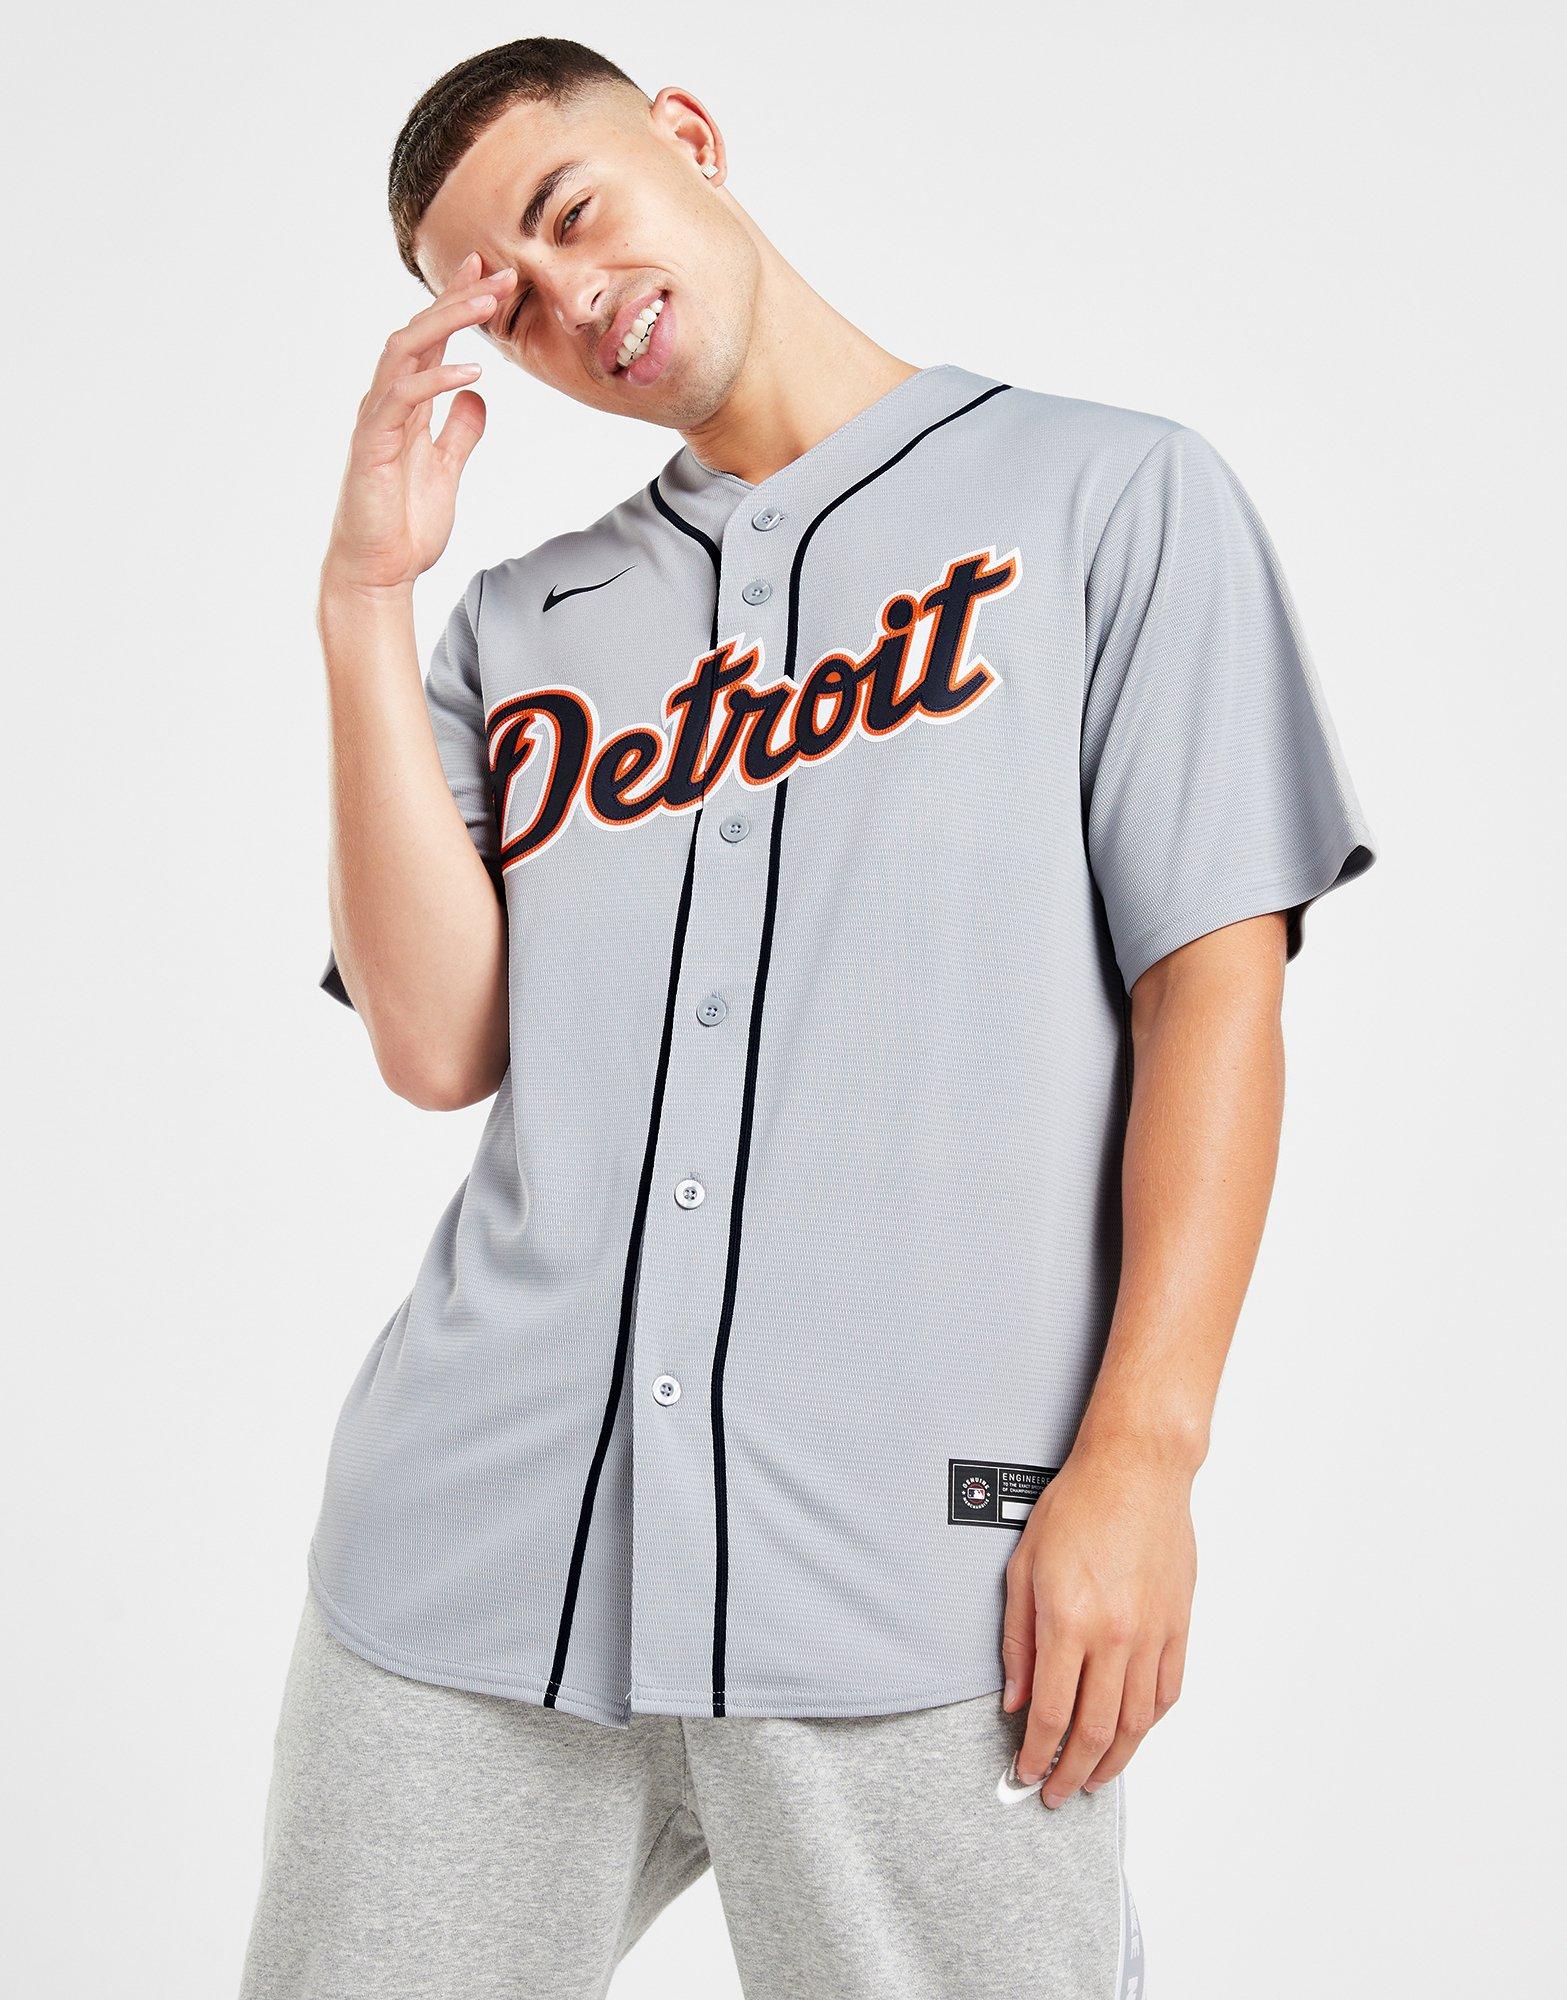 Stance MLB Detroit TIGERS Home Baseball Jersey Look White Socks Mn's  9-12 NWT